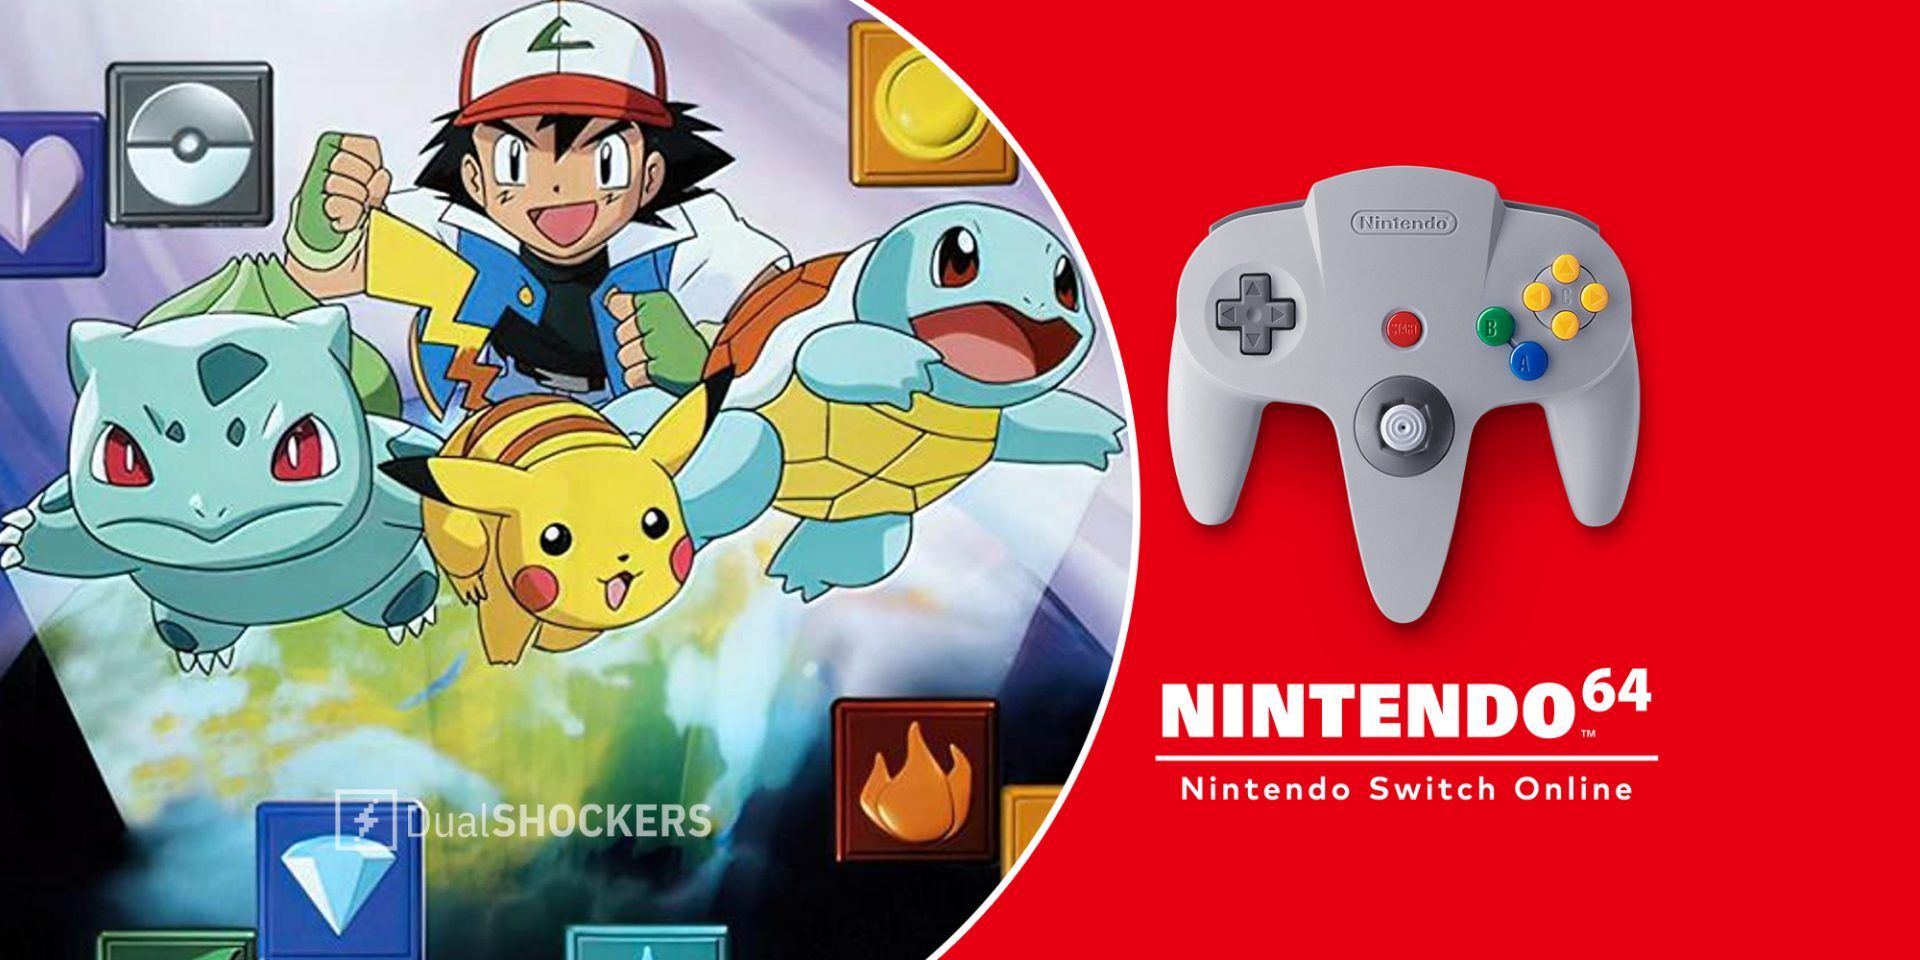 Pokemon Puzzle League promo image with Ash, Bulbasaur, Pikachu, and Squirtle on left, Nintendo Switch Online Nintendo 64 controller on right